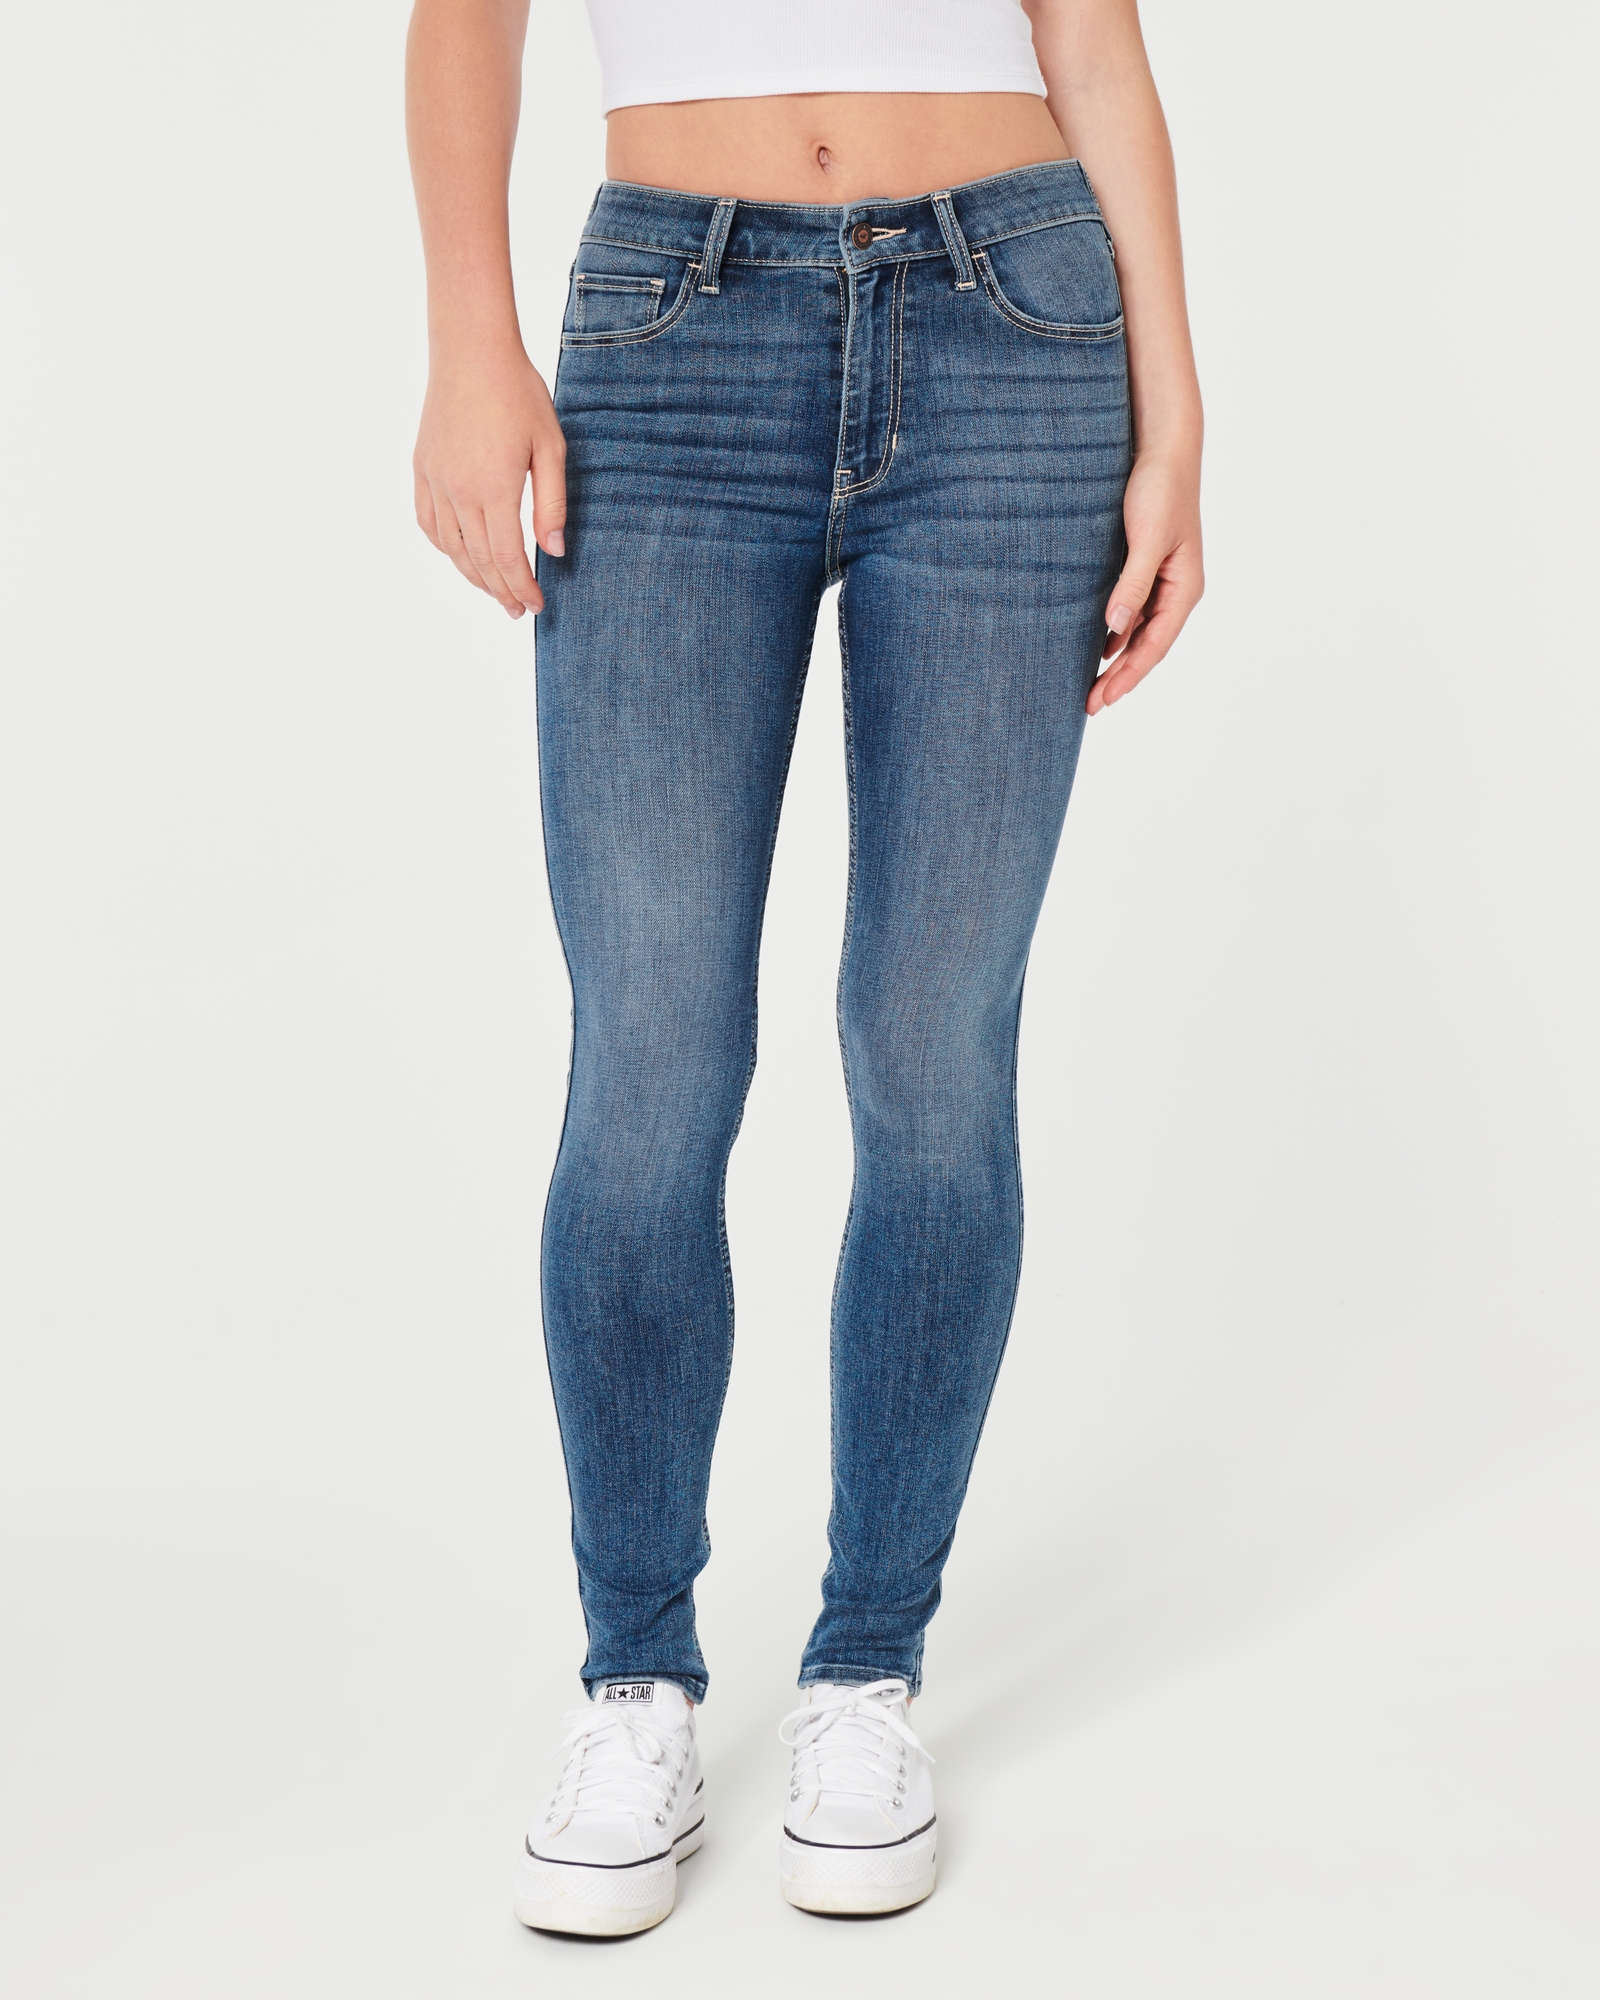 https://img.hollisterco.com/is/image/anf/KIC_355-2201-0556-278_model2.jpg?policy=product-extra-large